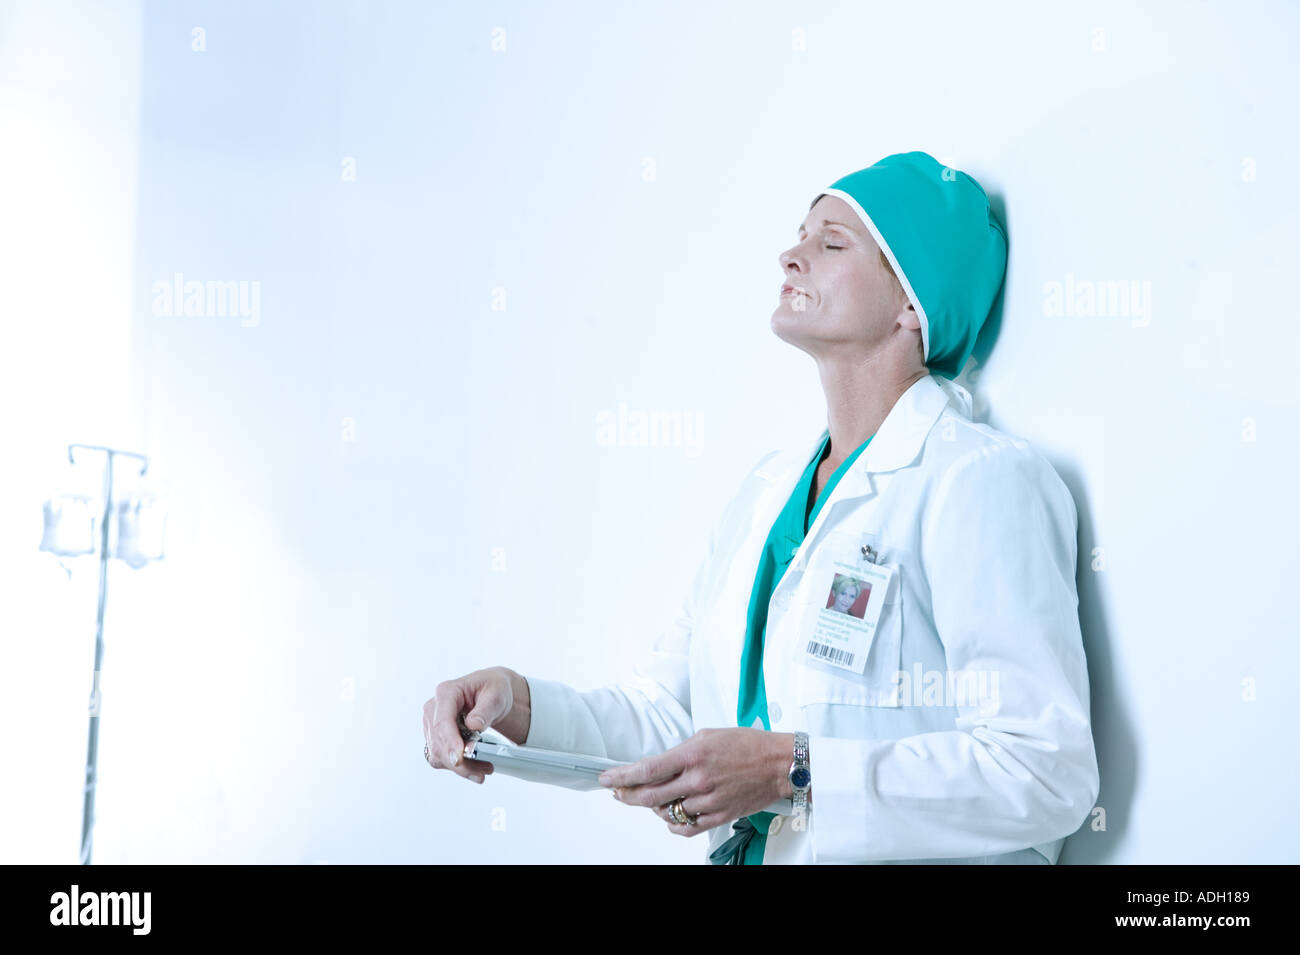 A tired healthcare worker Stock Photo